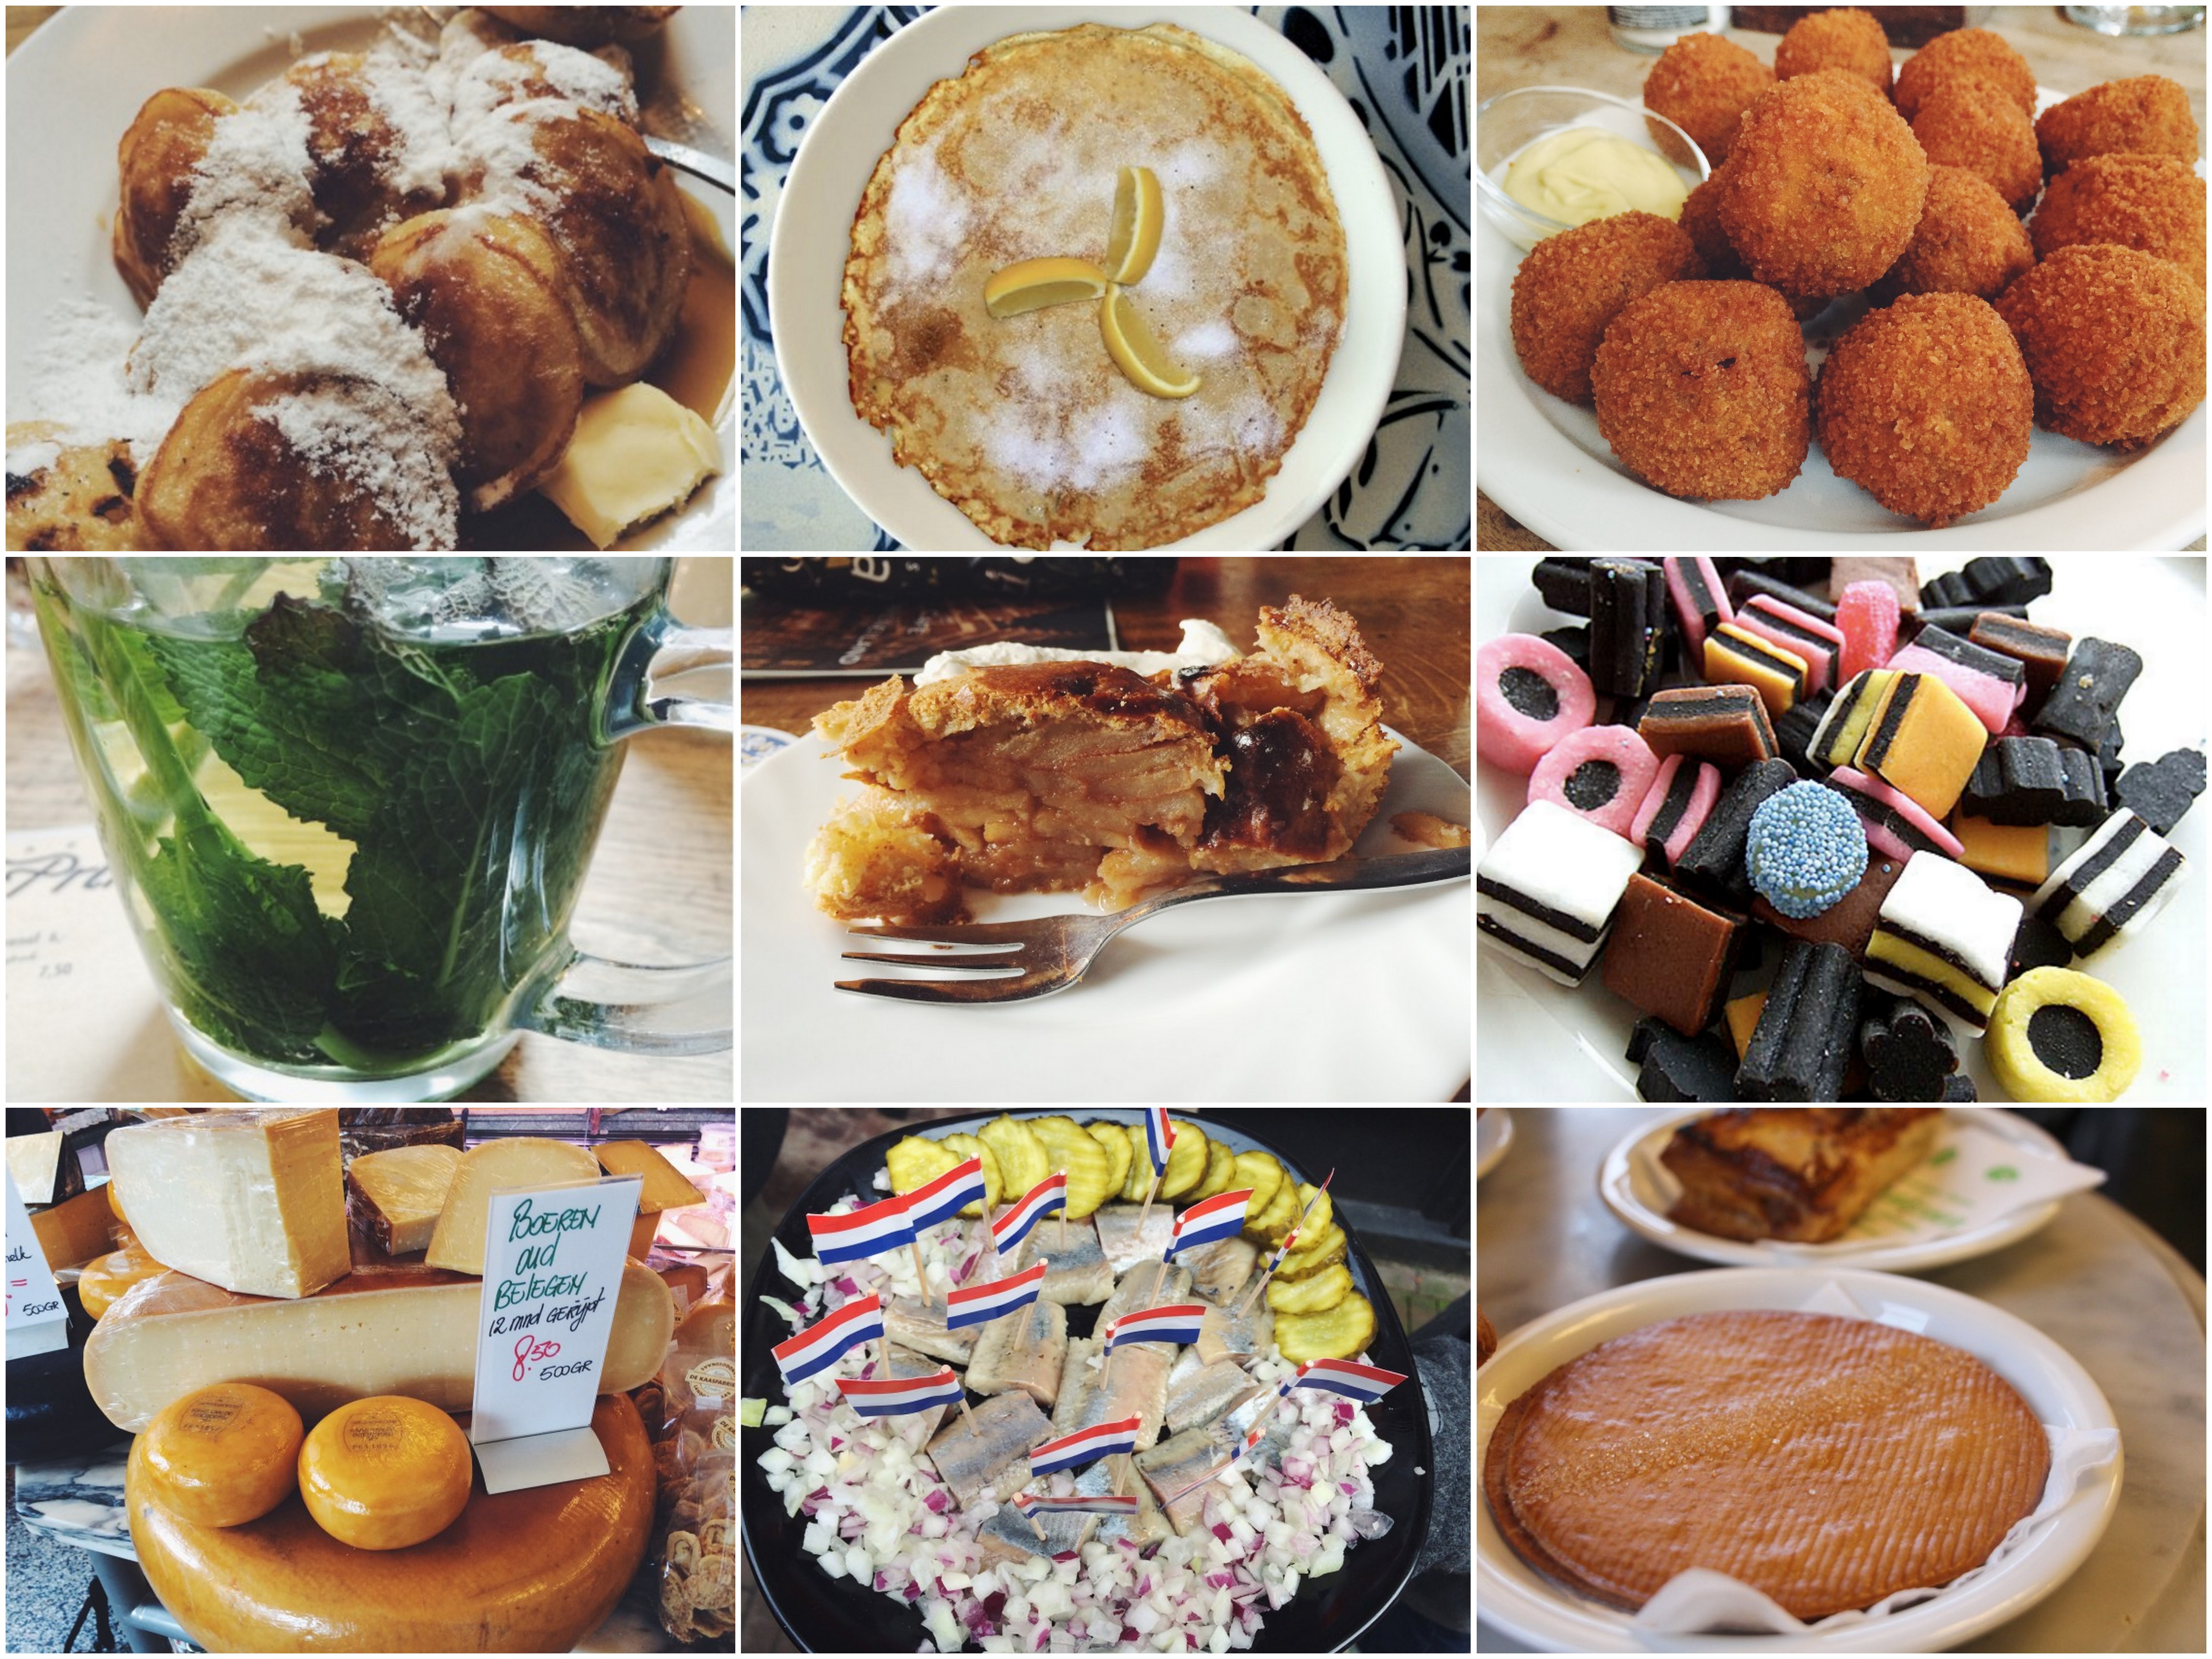 10 Dutch foods to try in Amsterdam